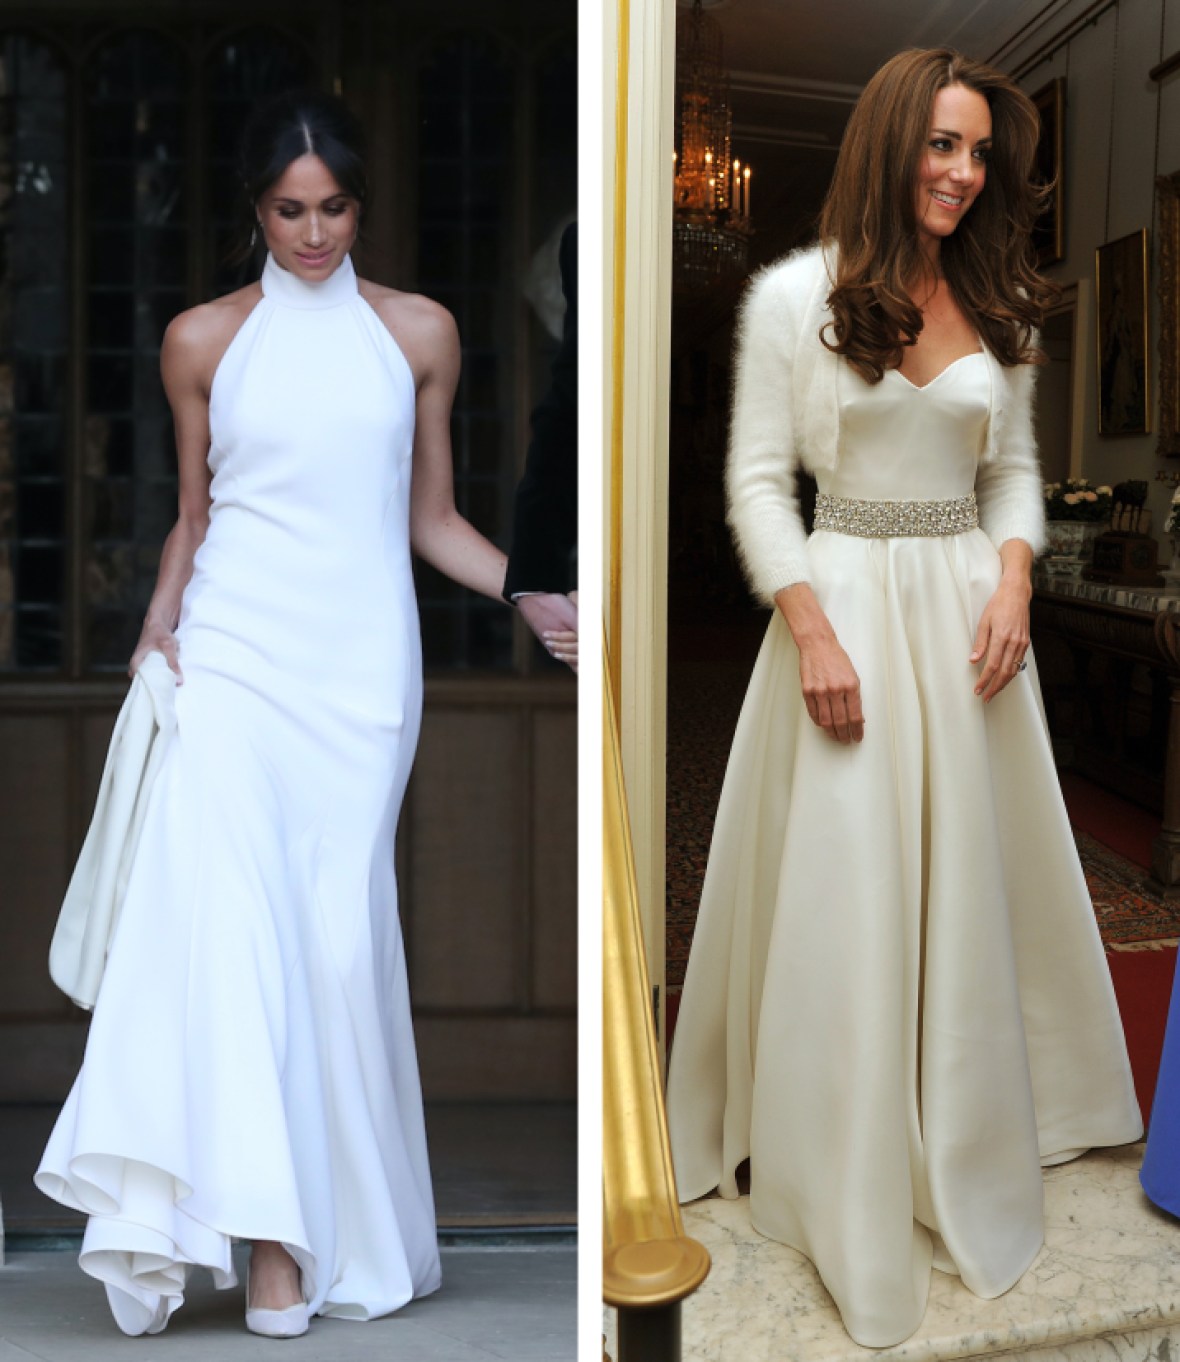 Meghan Markle Stuns in Second Wedding Dress at Reception Like Kate ...